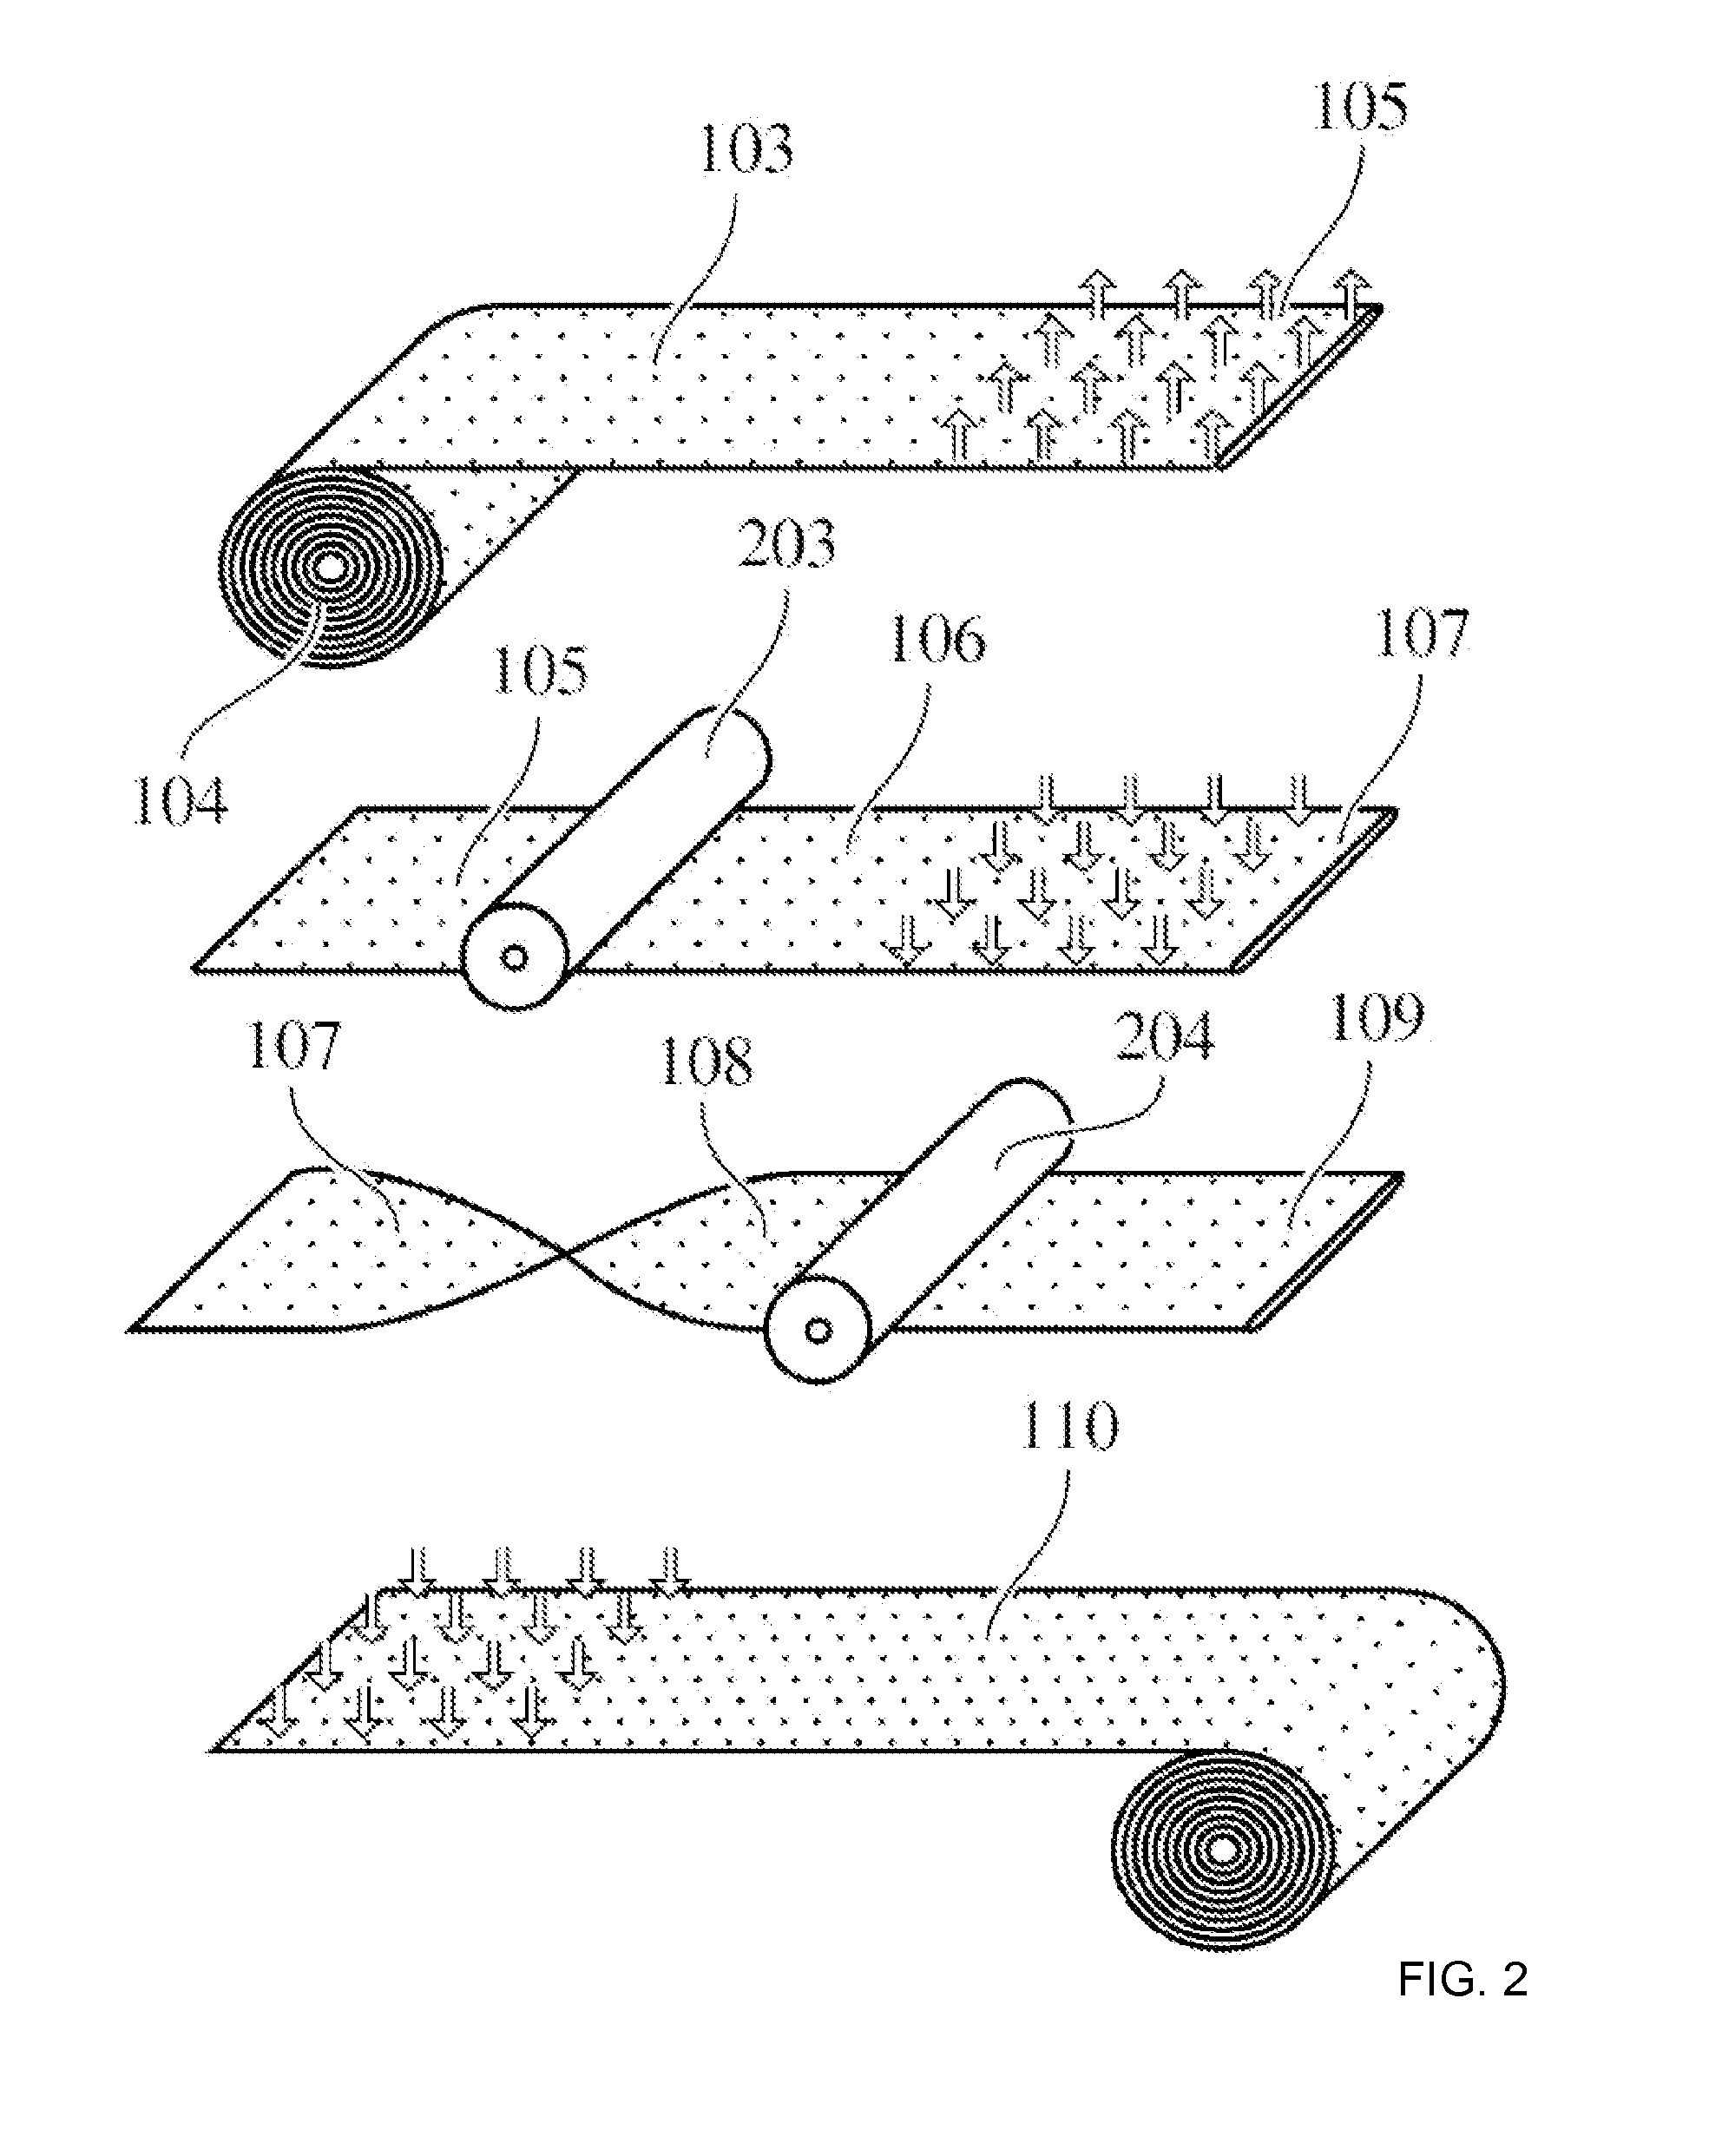 Process for producing a polymeric film with a cured polysiloxane coating